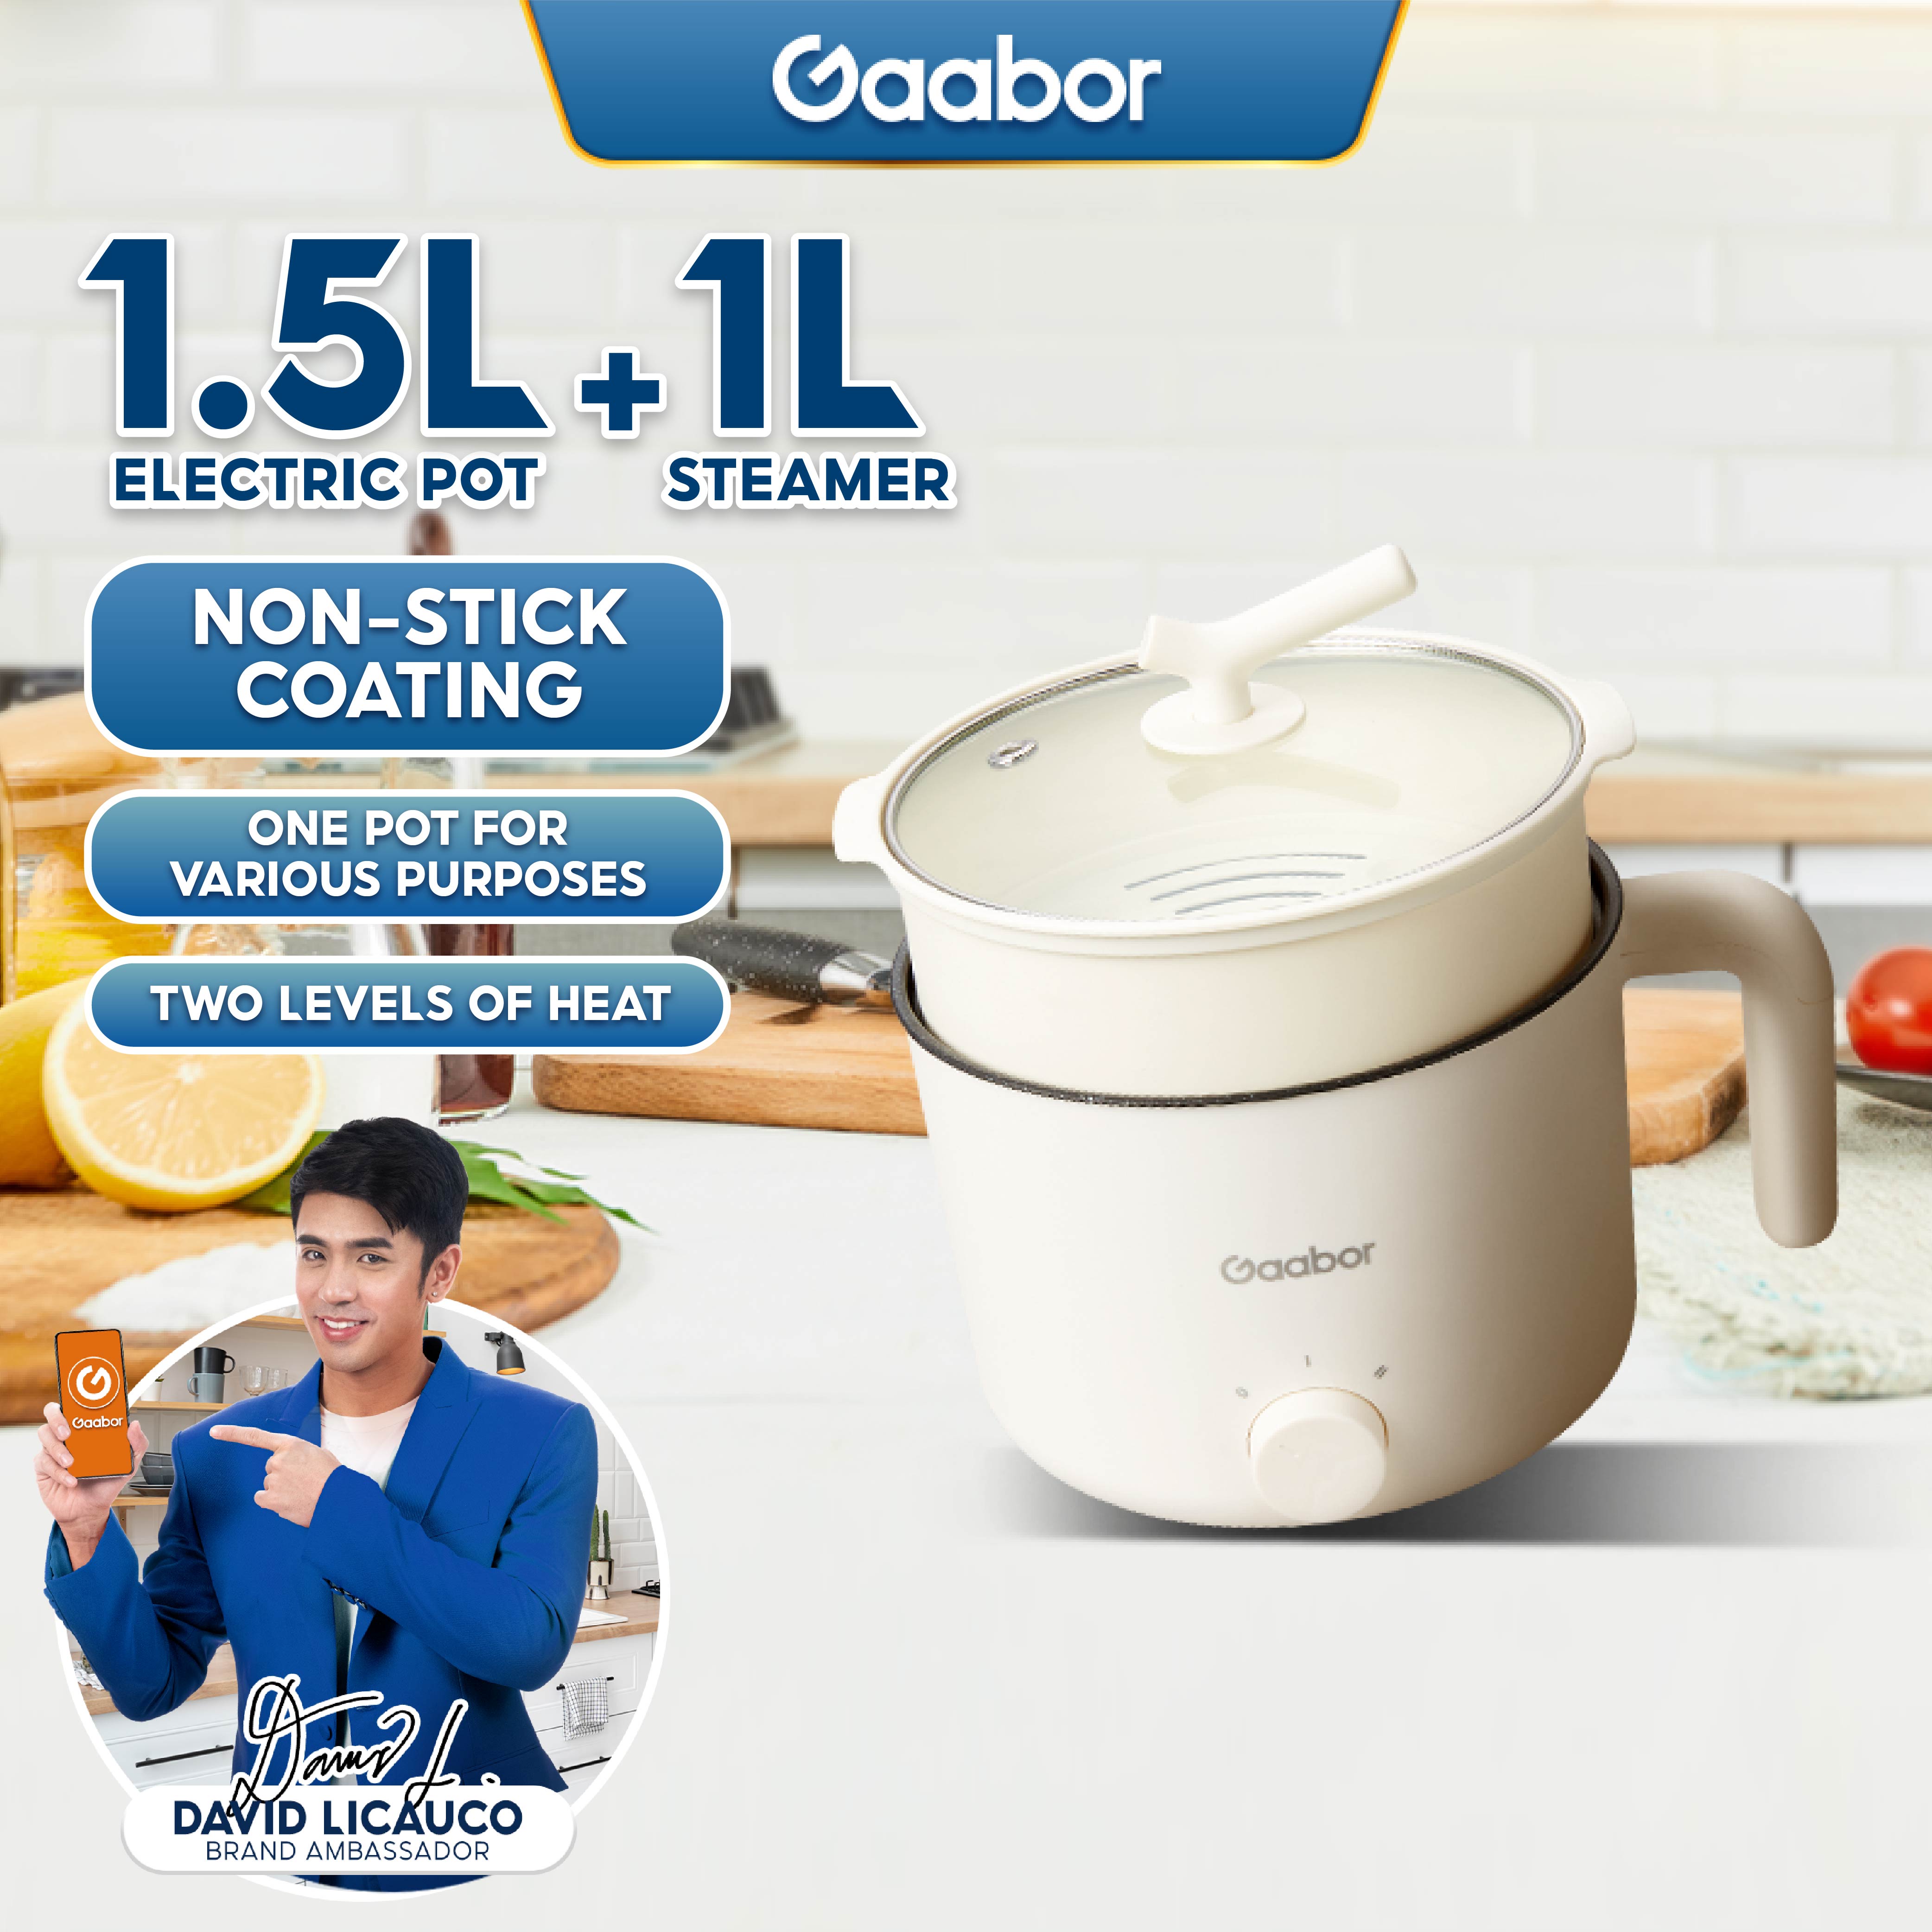 Gaabor Rice Cooker, Automatic Rice Cooking Machine Wholesale